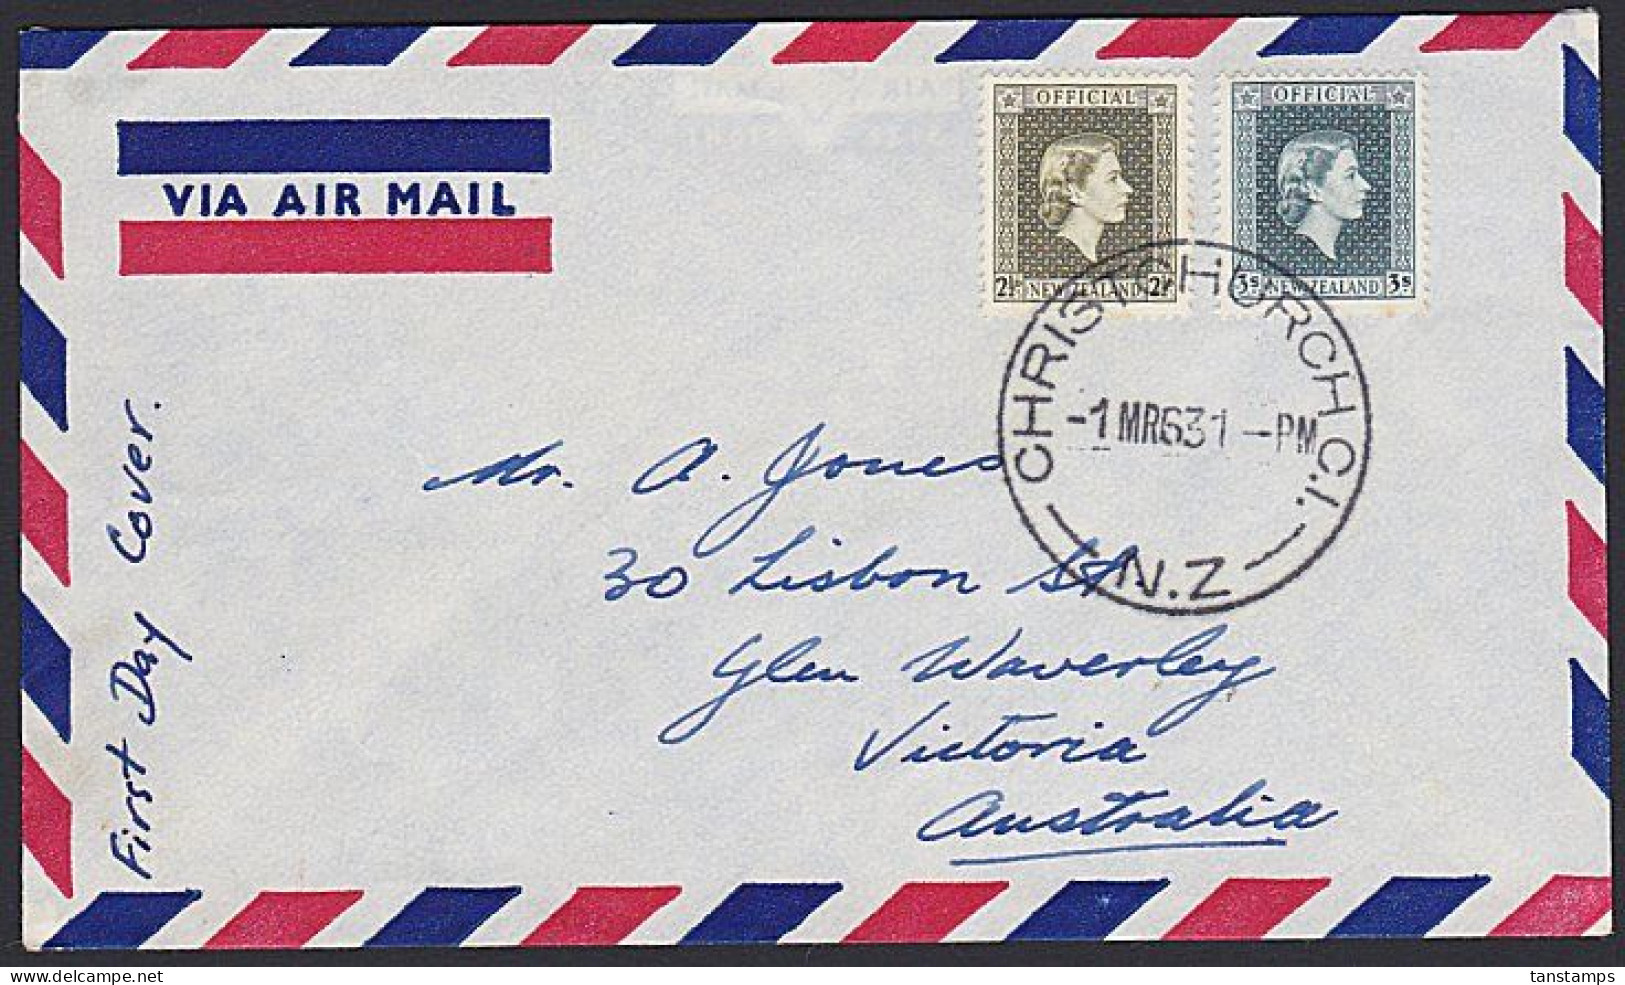 QEII OFFICIAL FDC AIRMAIL TO AUSTRALIA - Luftpost